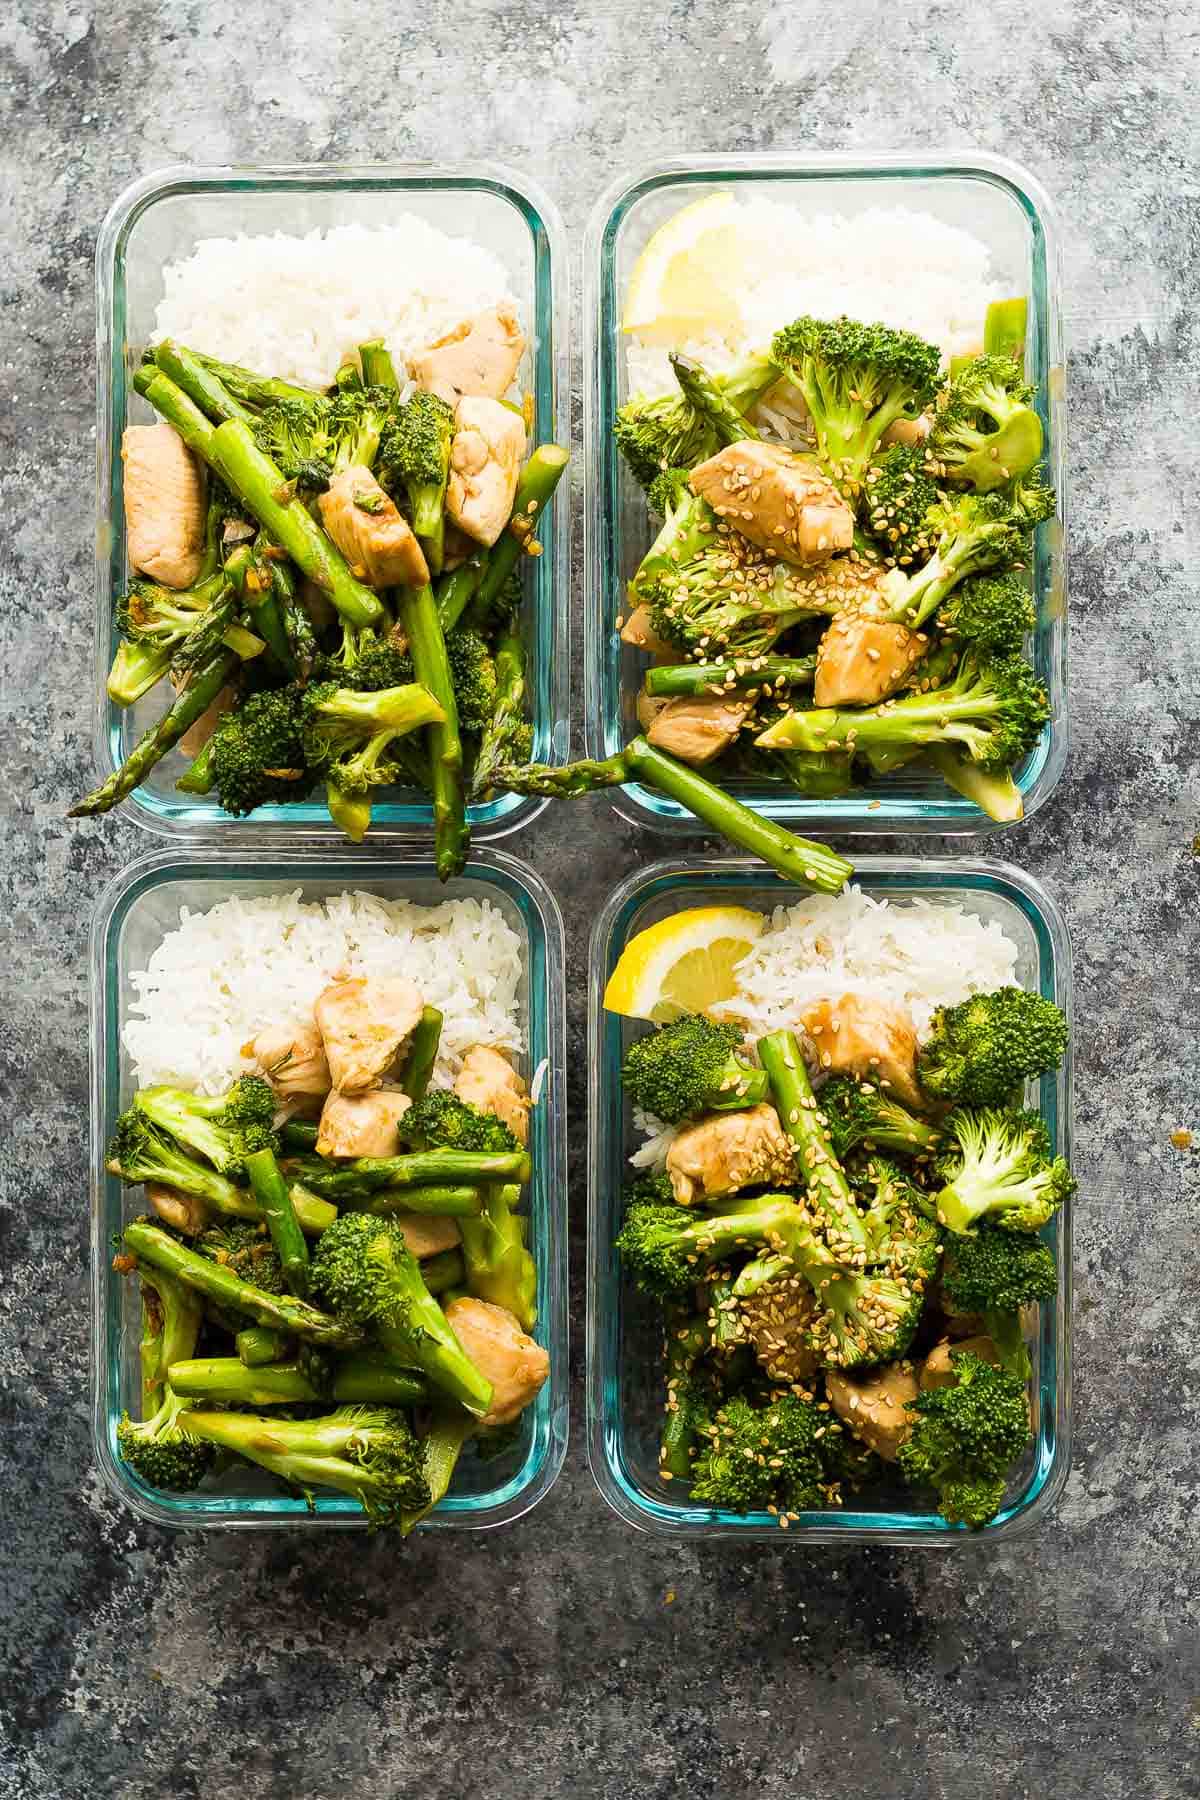 Four bowls of asparagus broccoli chicken stir fry with rice.